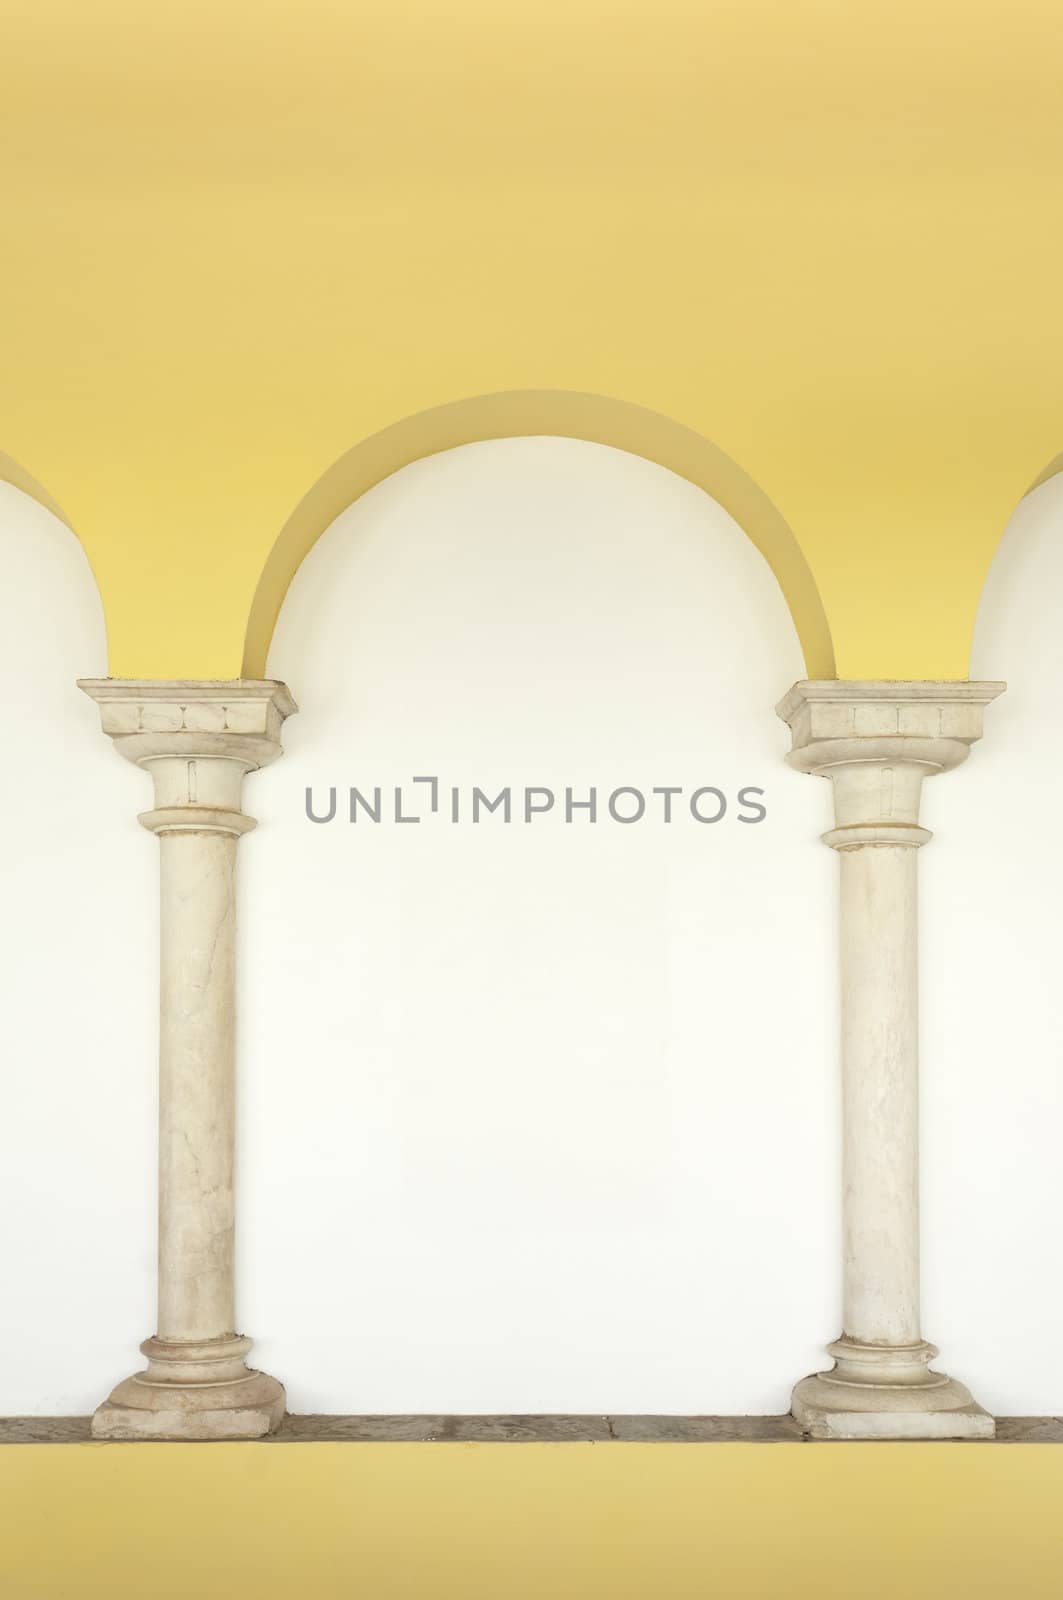 Two marble columns embedded in the wall topped by an arch painted in yellow, Elvas, Portugal